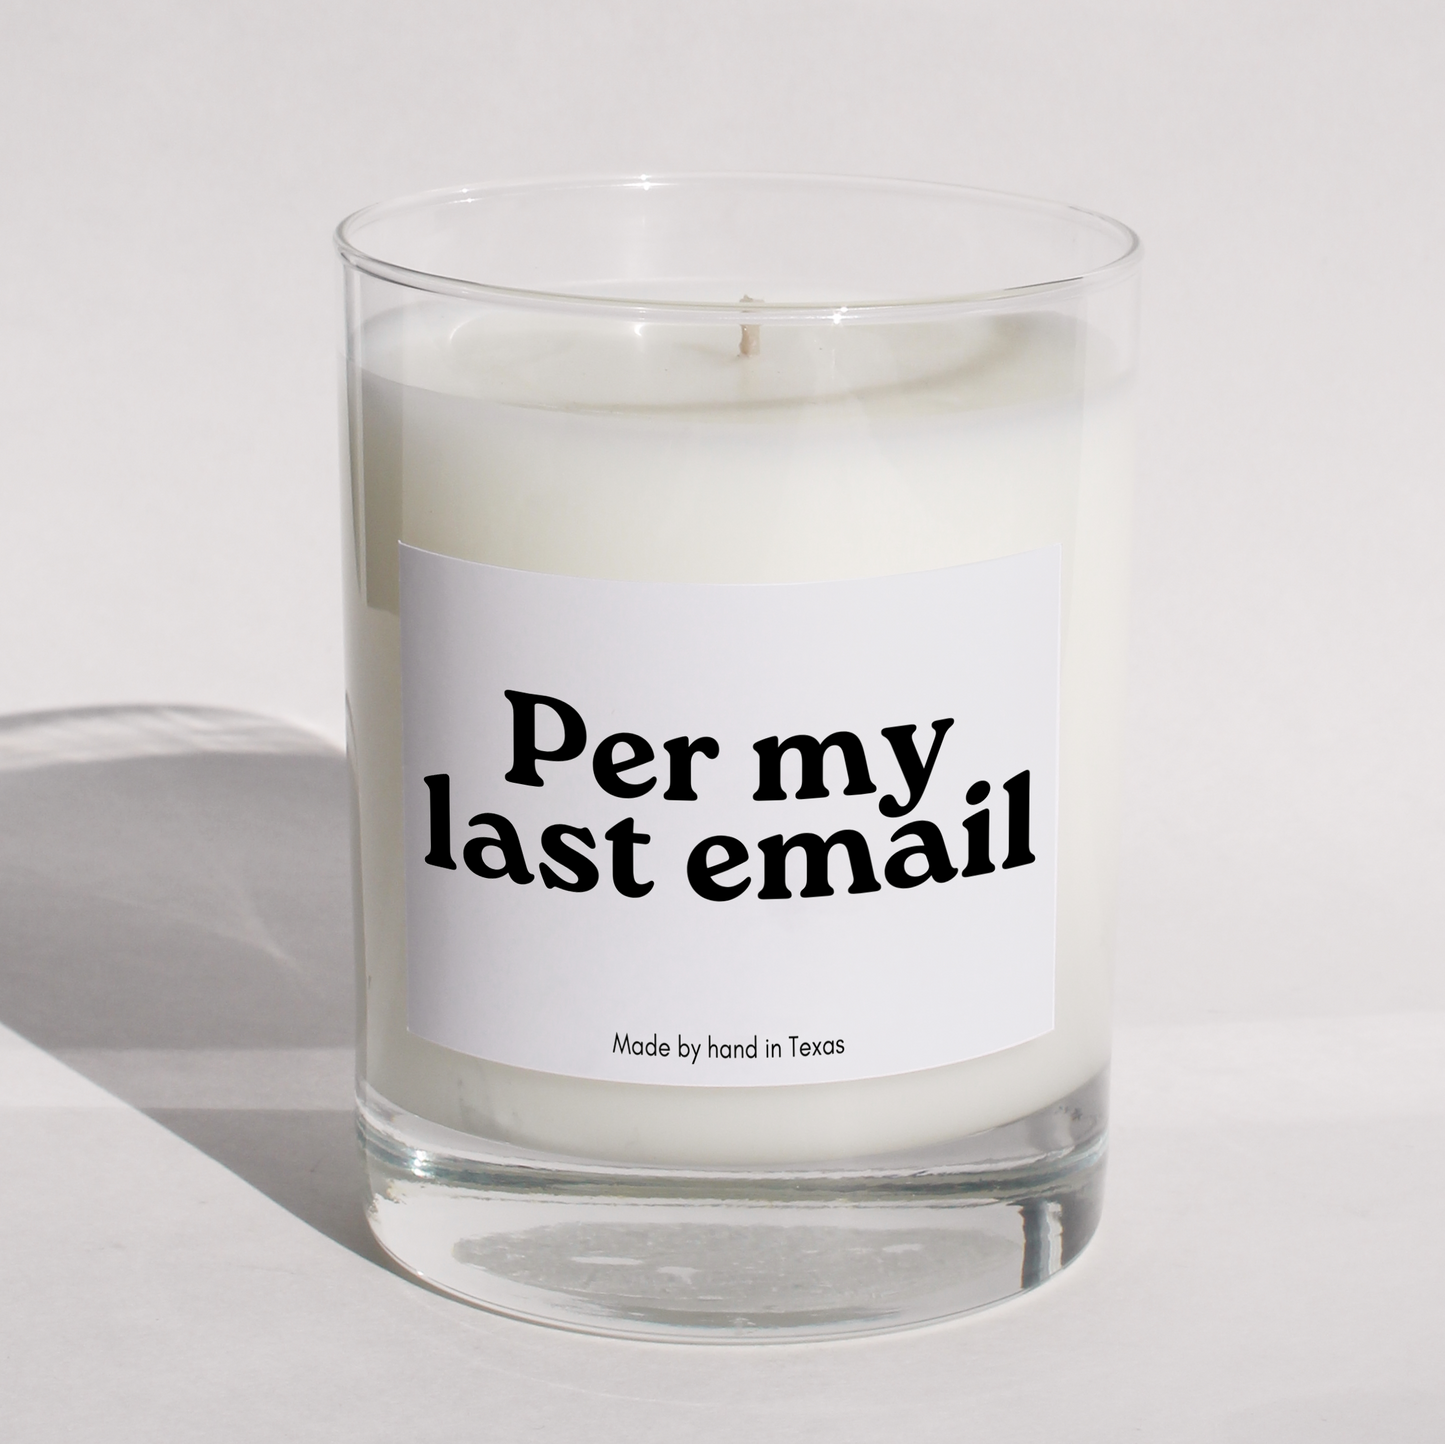 Per my last email - Naughty Candle